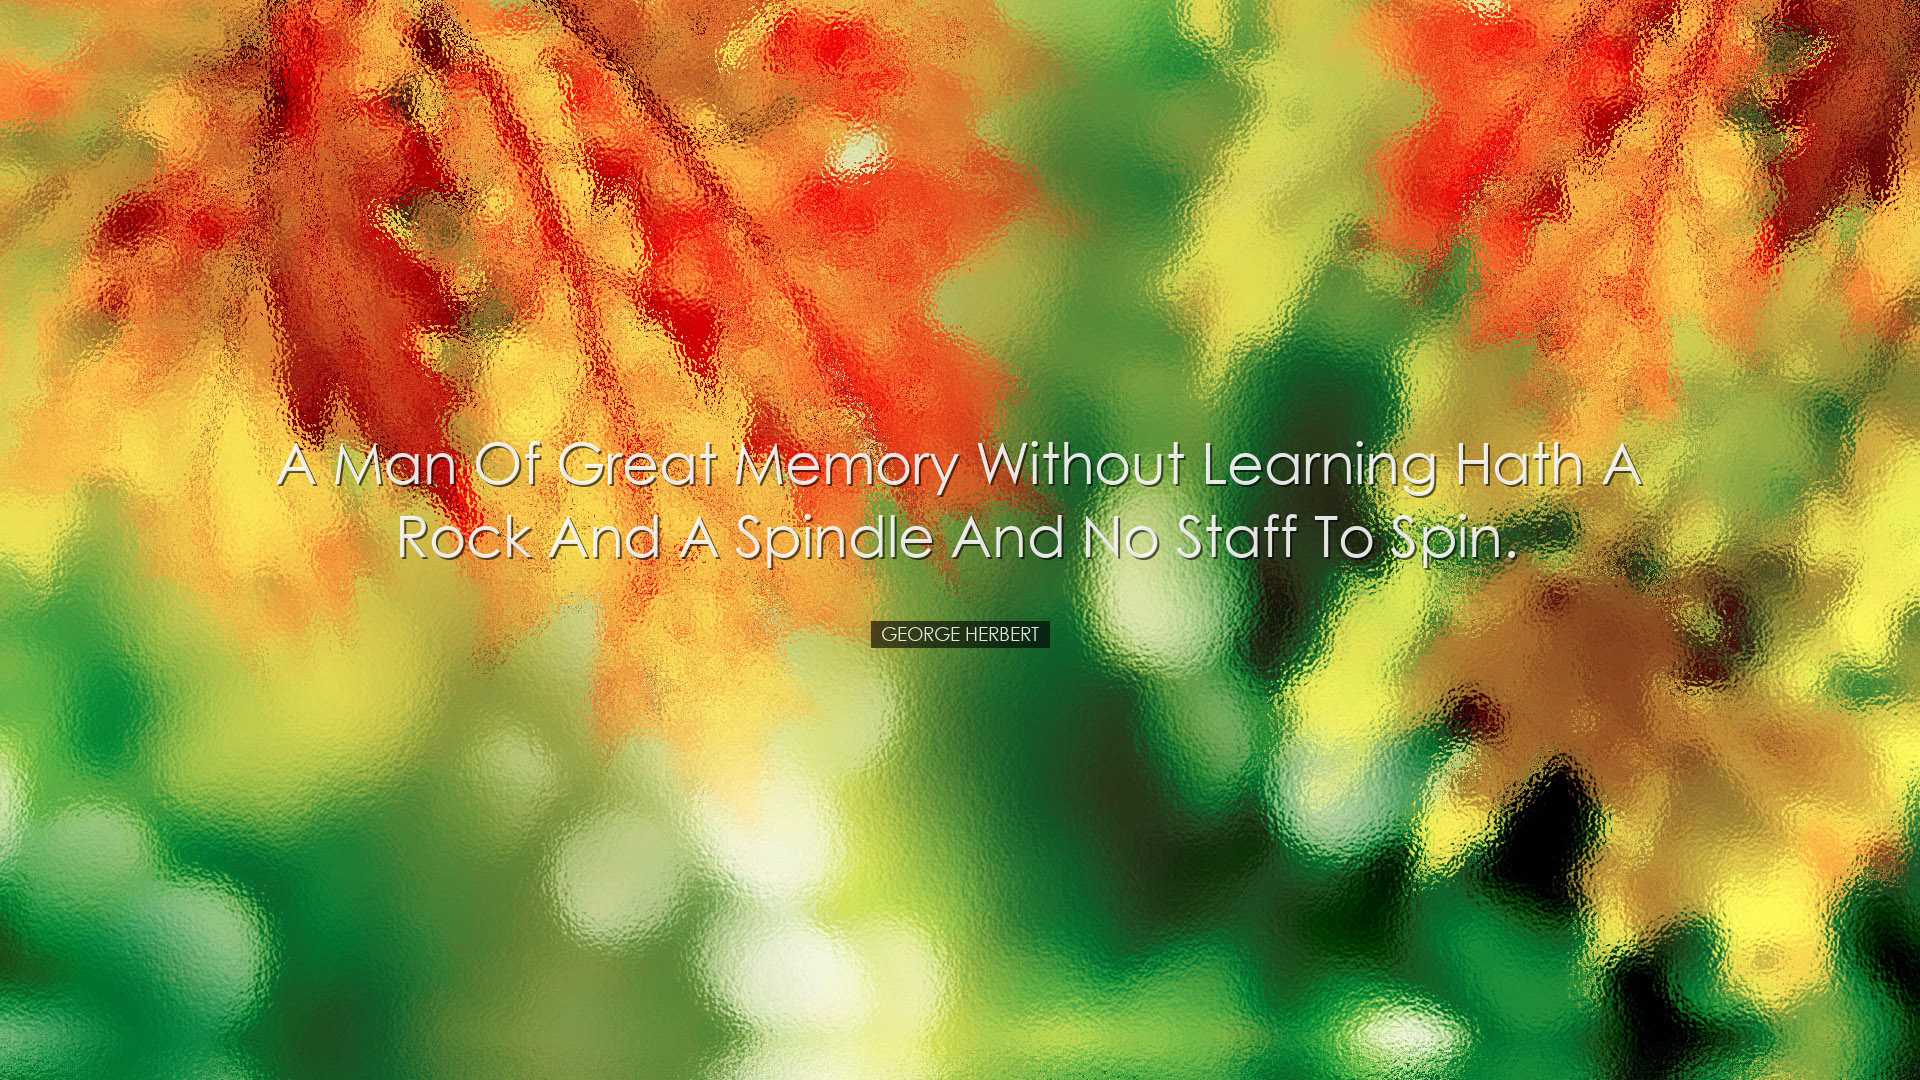 A man of great memory without learning hath a rock and a spindle a